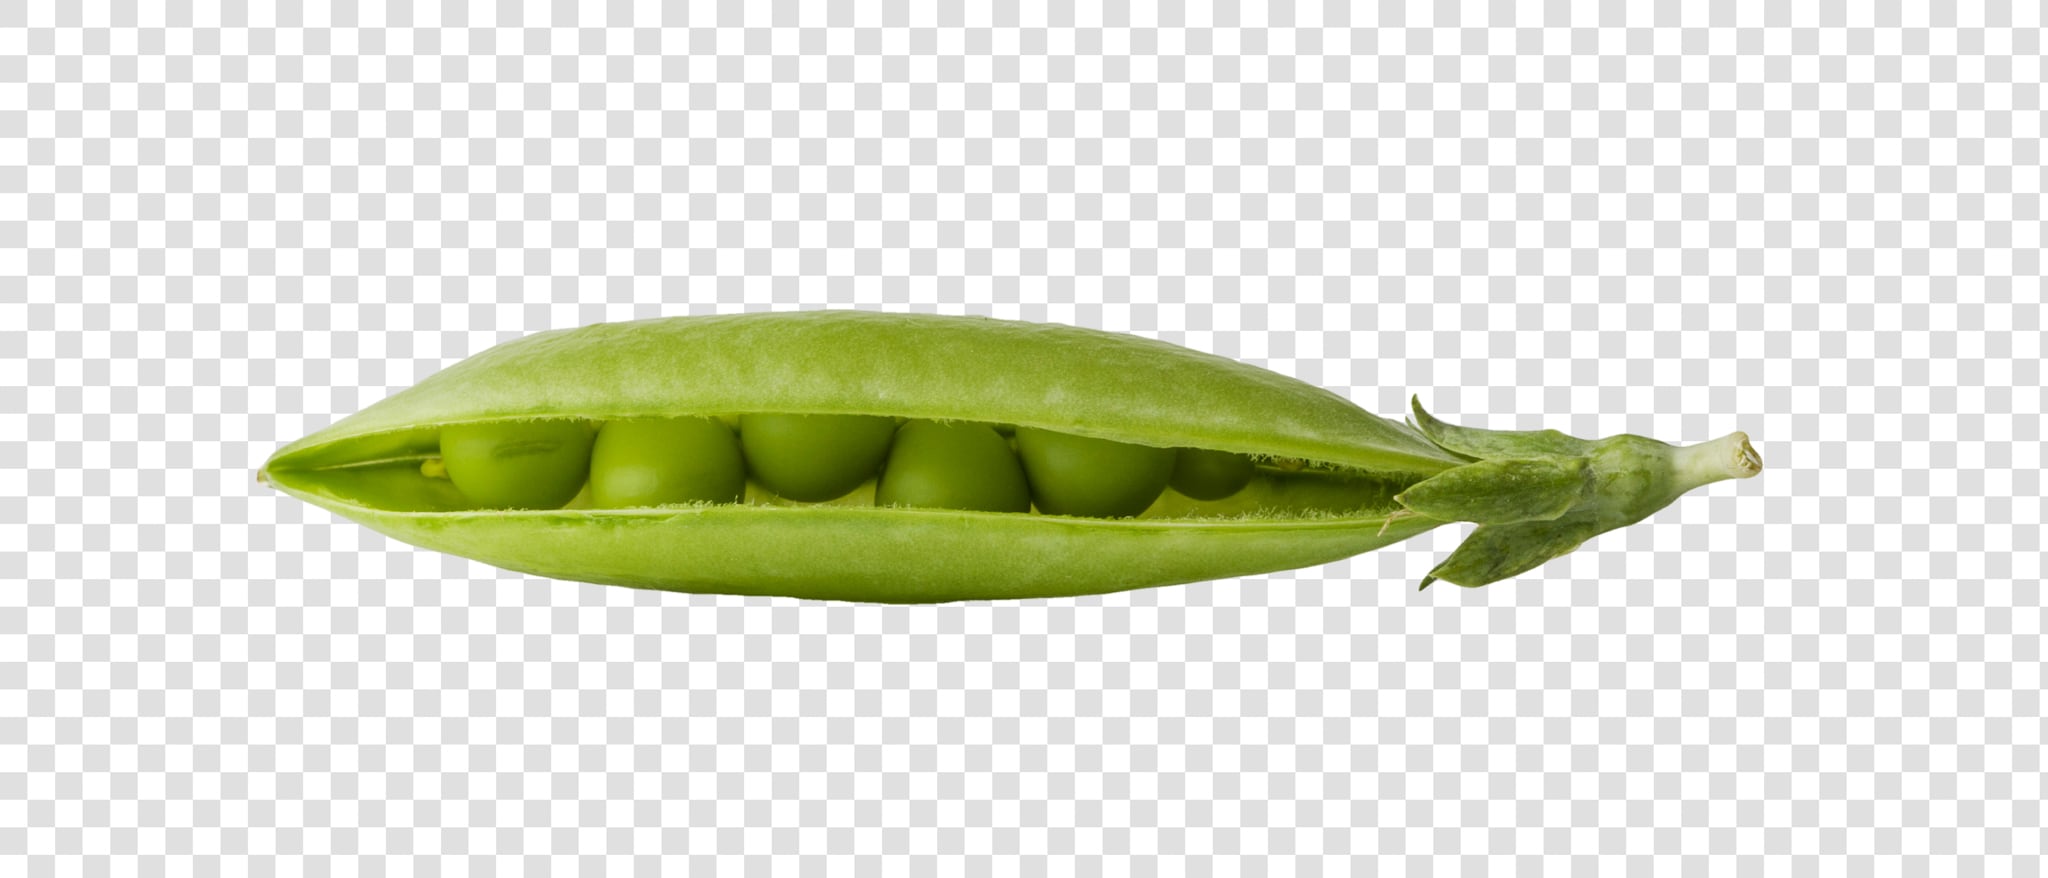 Green pea image with transparent background